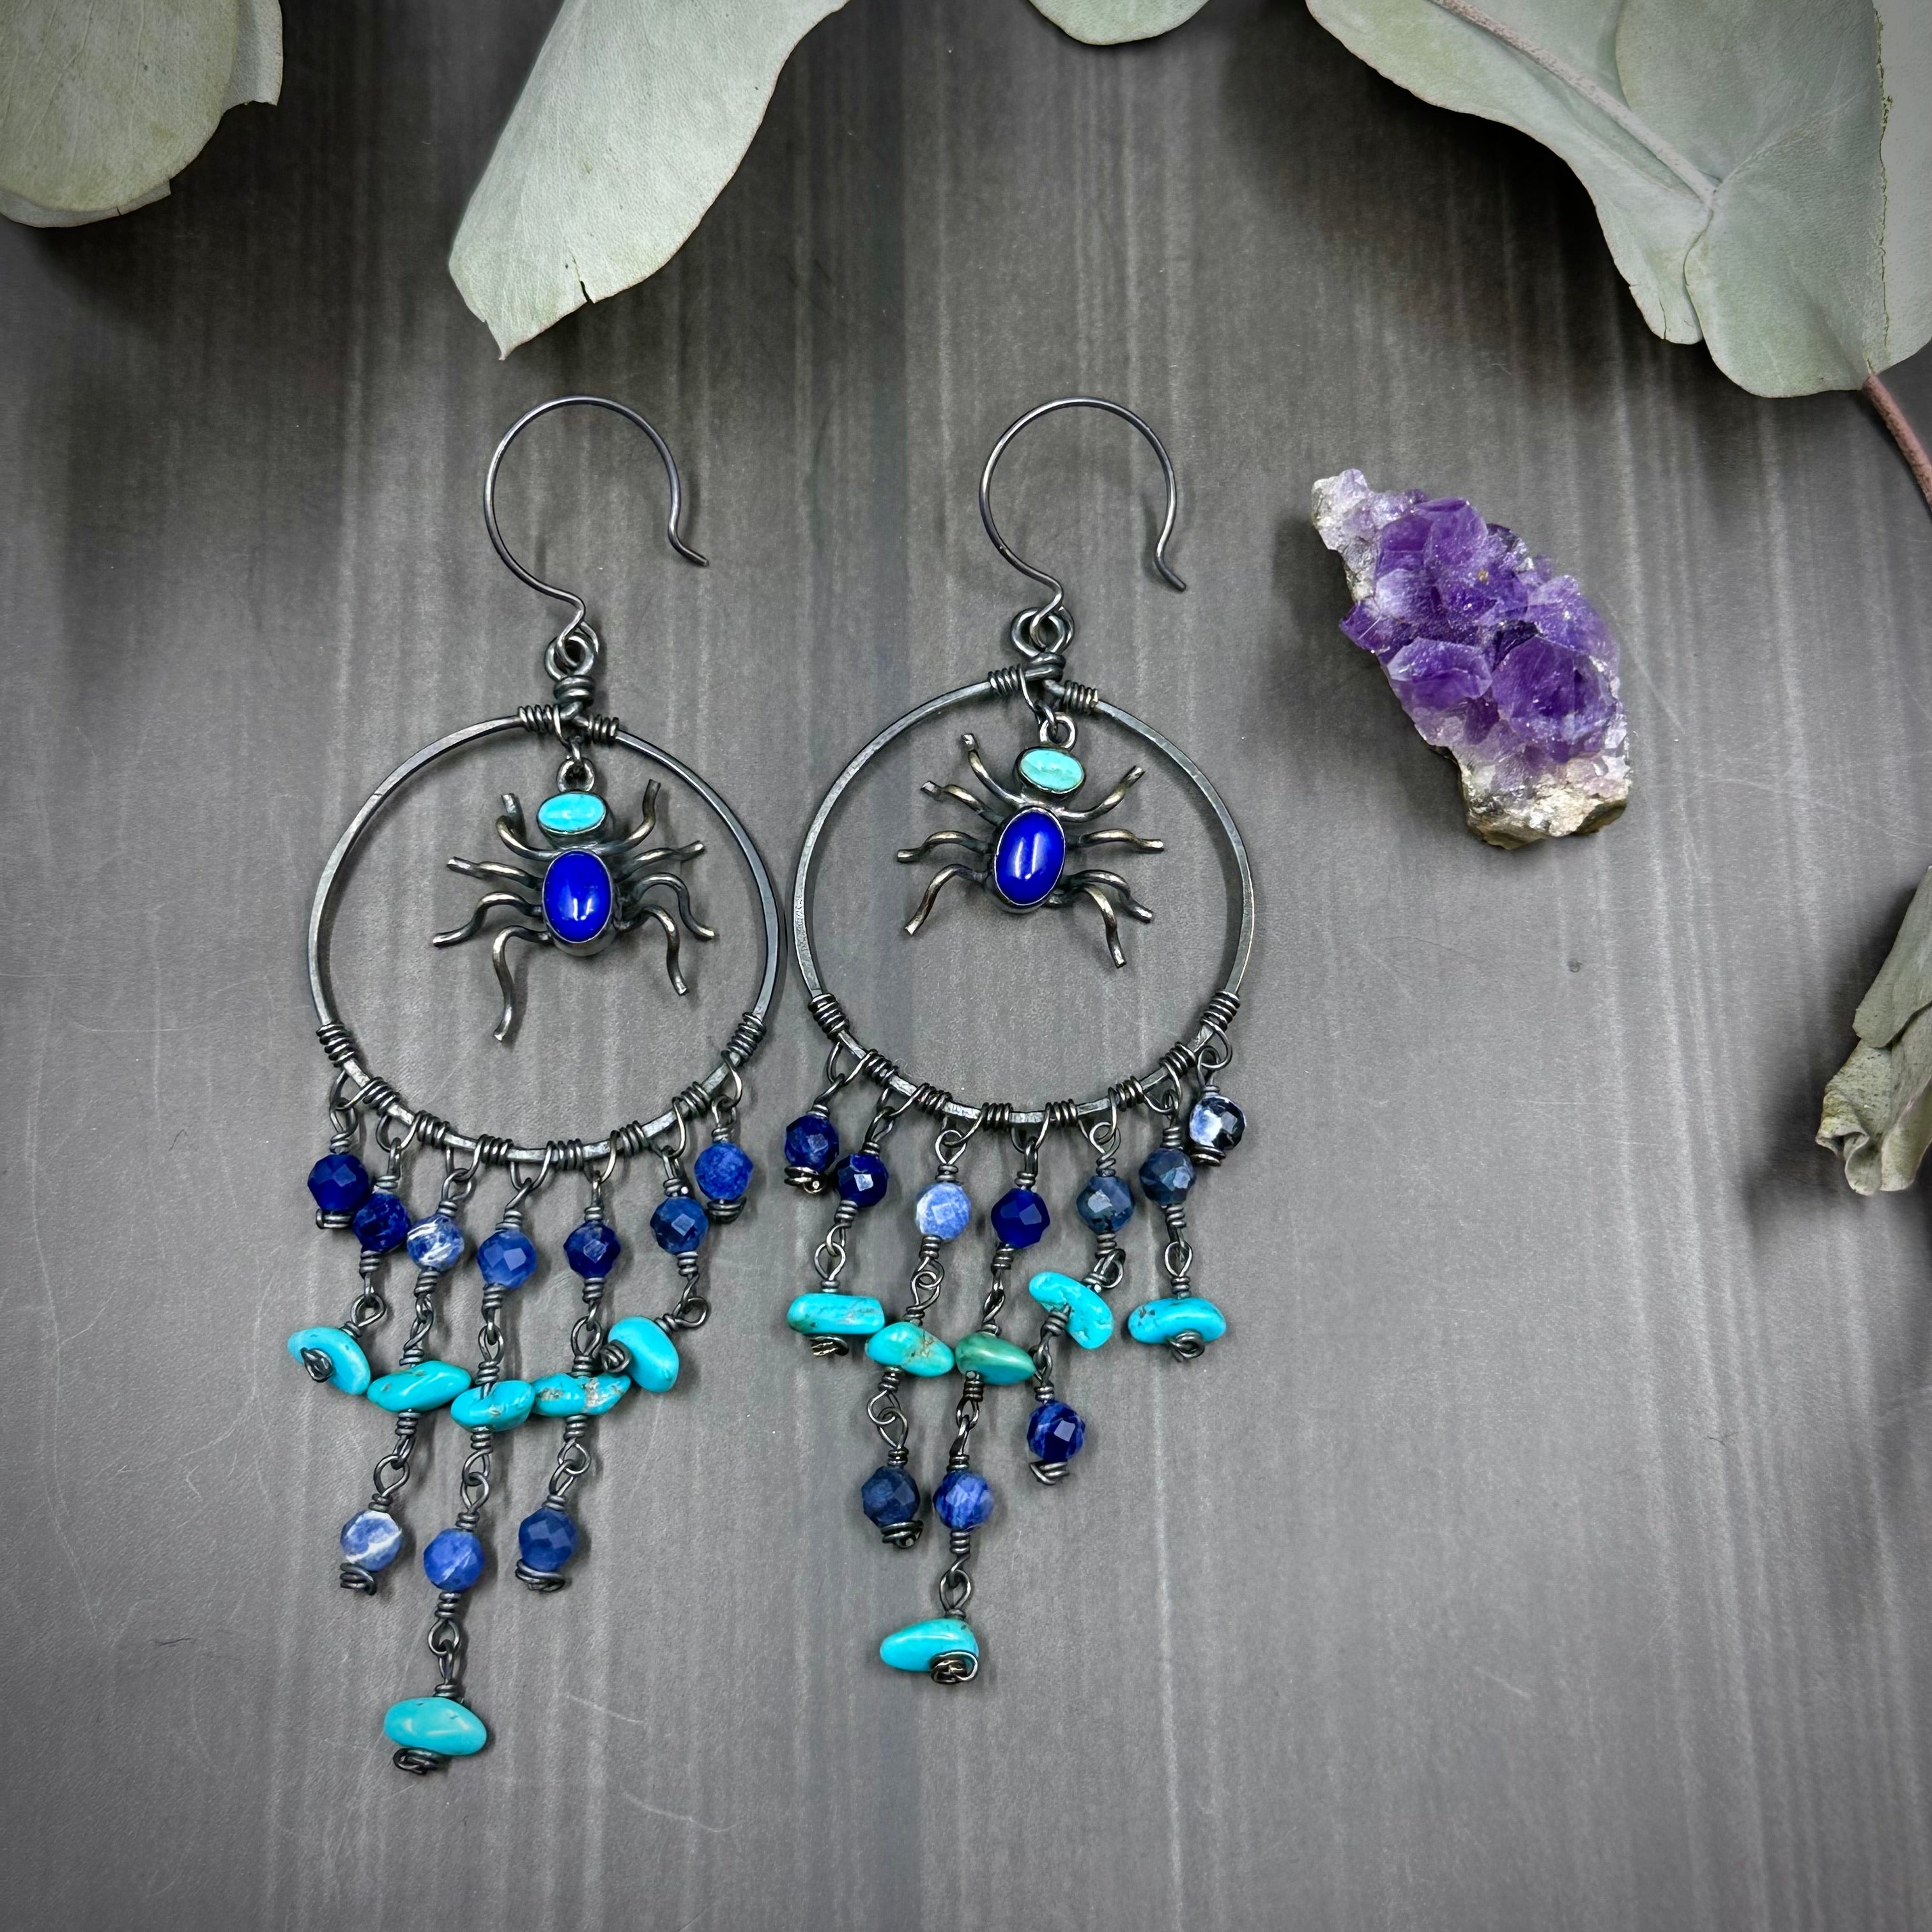 Lapis, Sodalite, and Turquoise Sterling silver Dangle Earrings